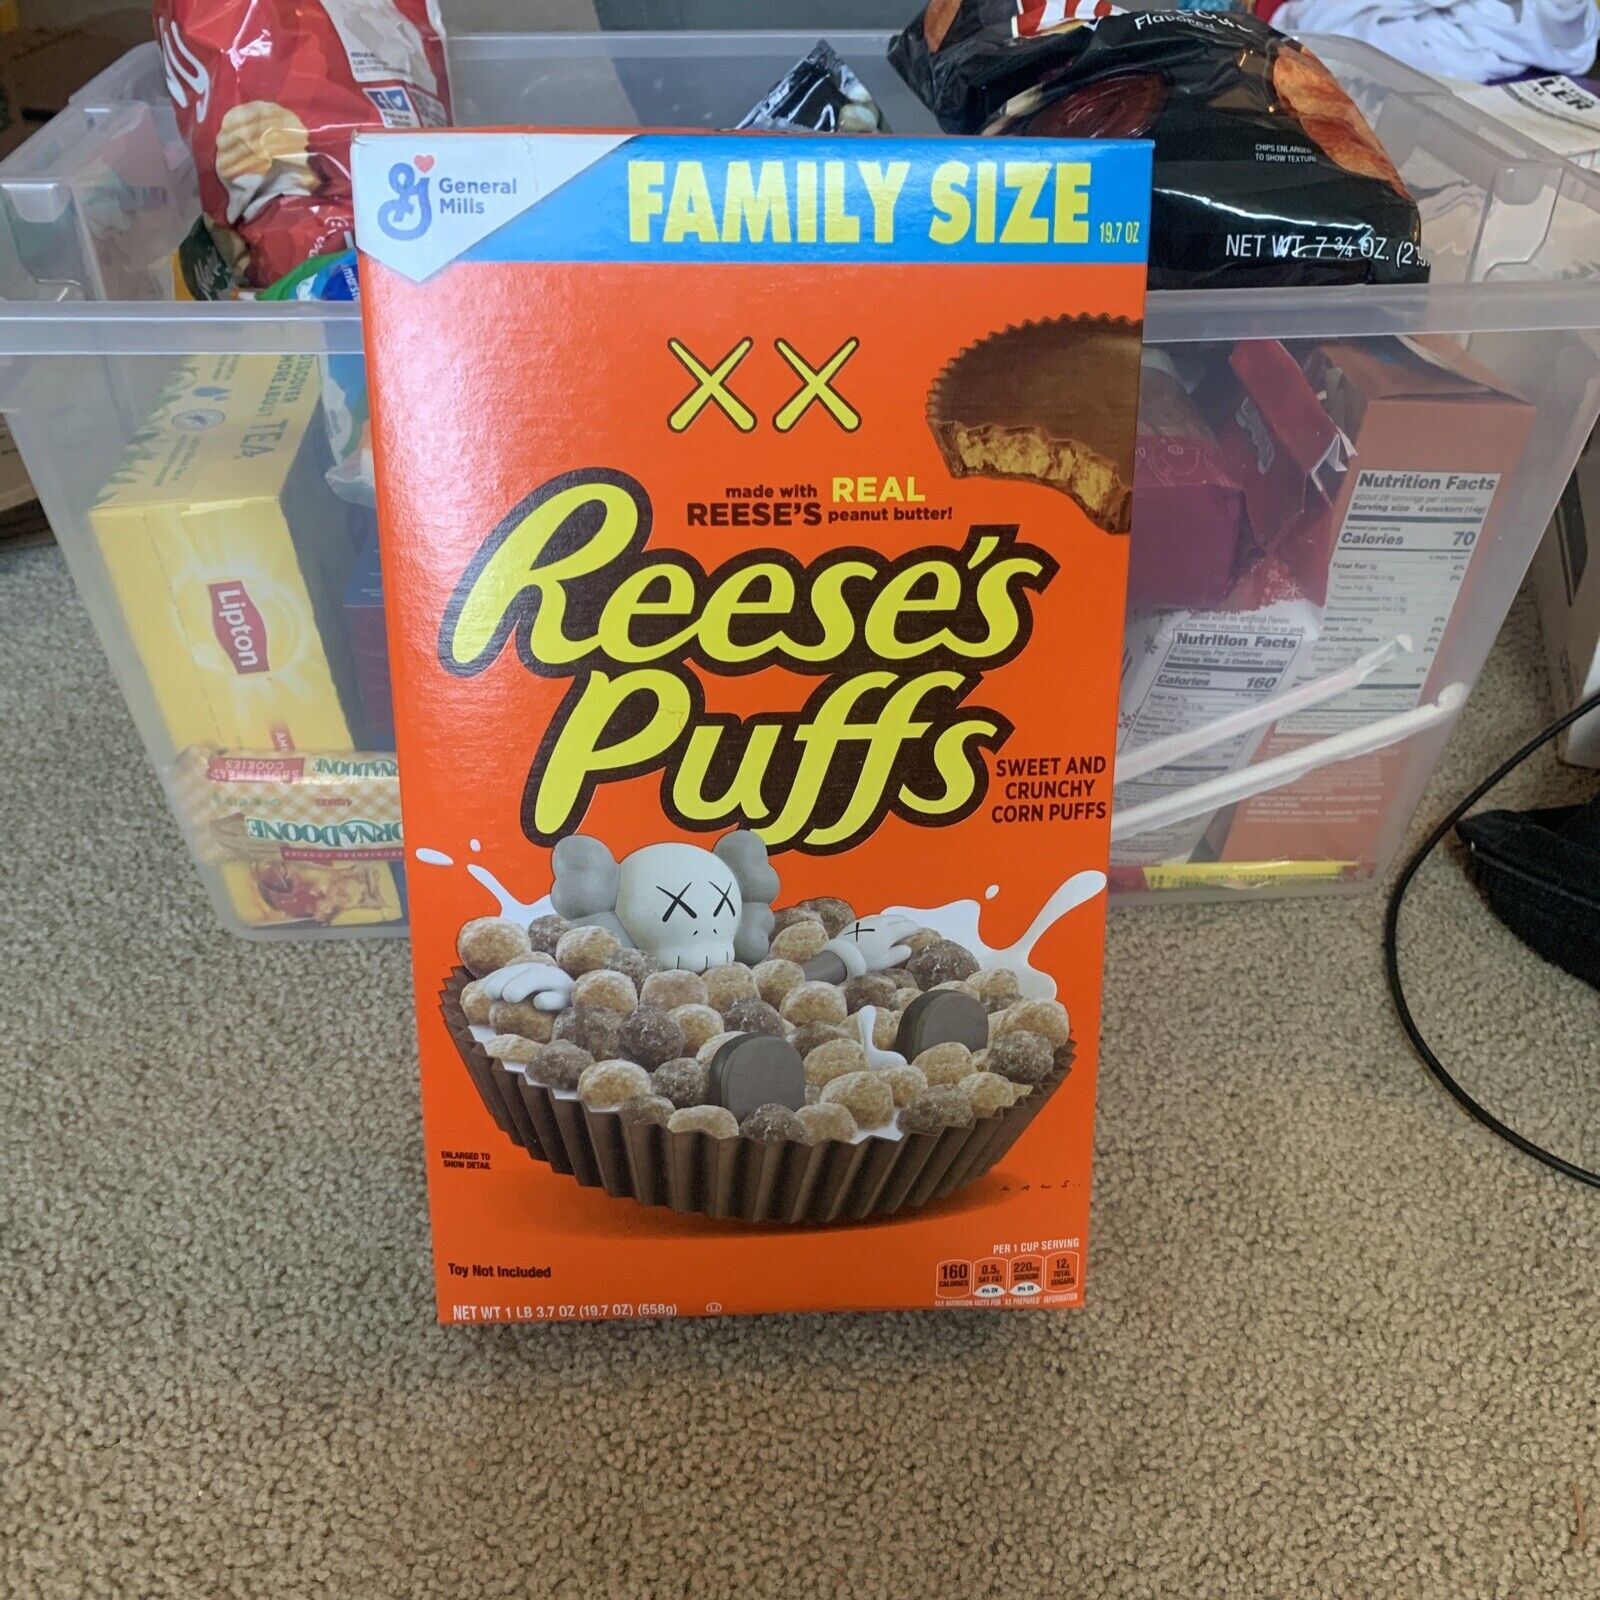 1x Kaws X Reese\'s Puffs Family Size Cereal Box - Limited Edition 